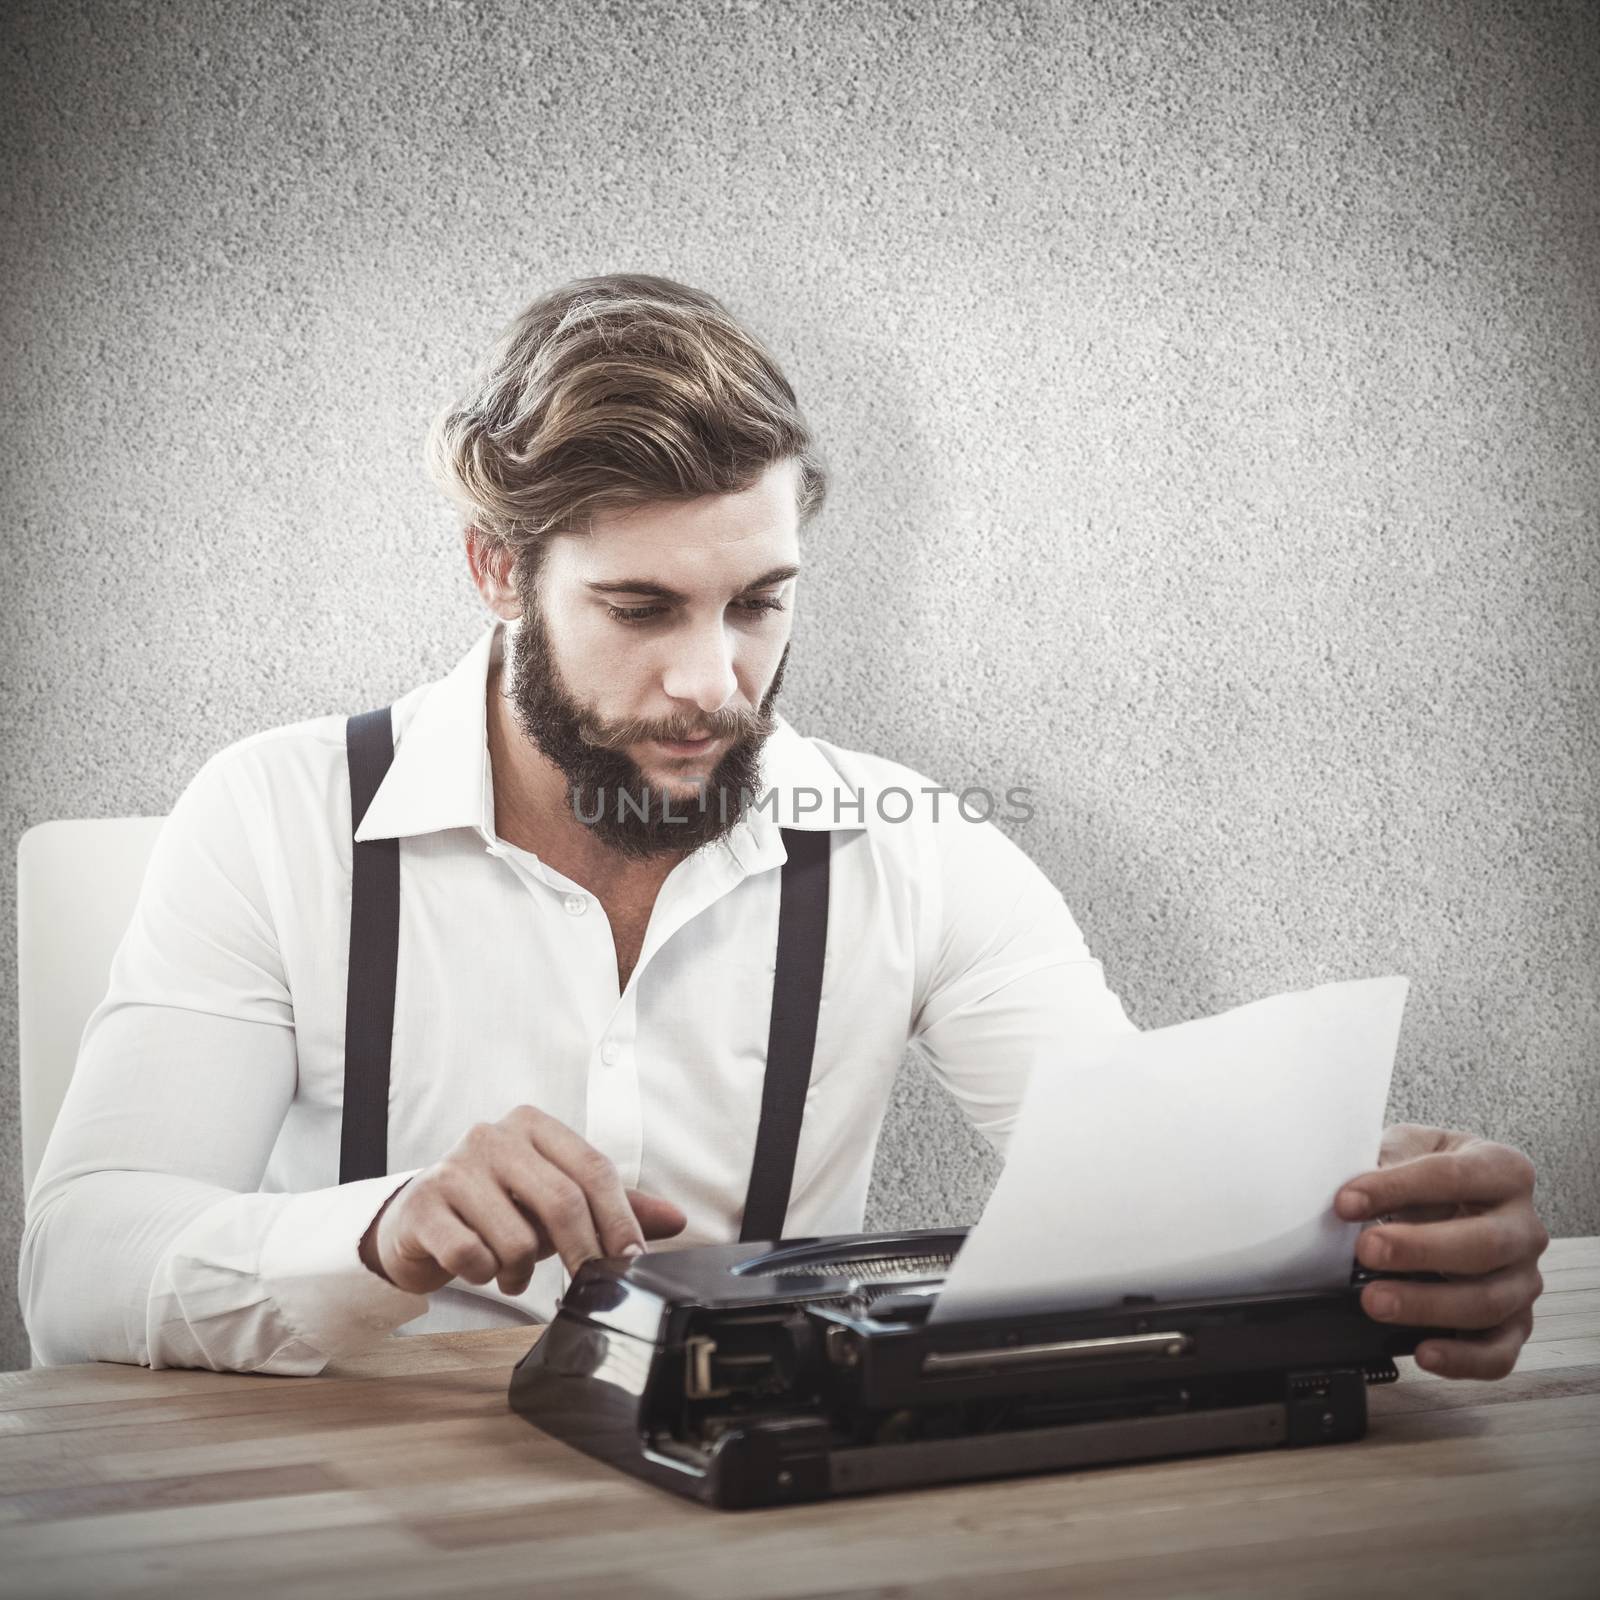 Hipster using typewriter at desk in office against grey wall